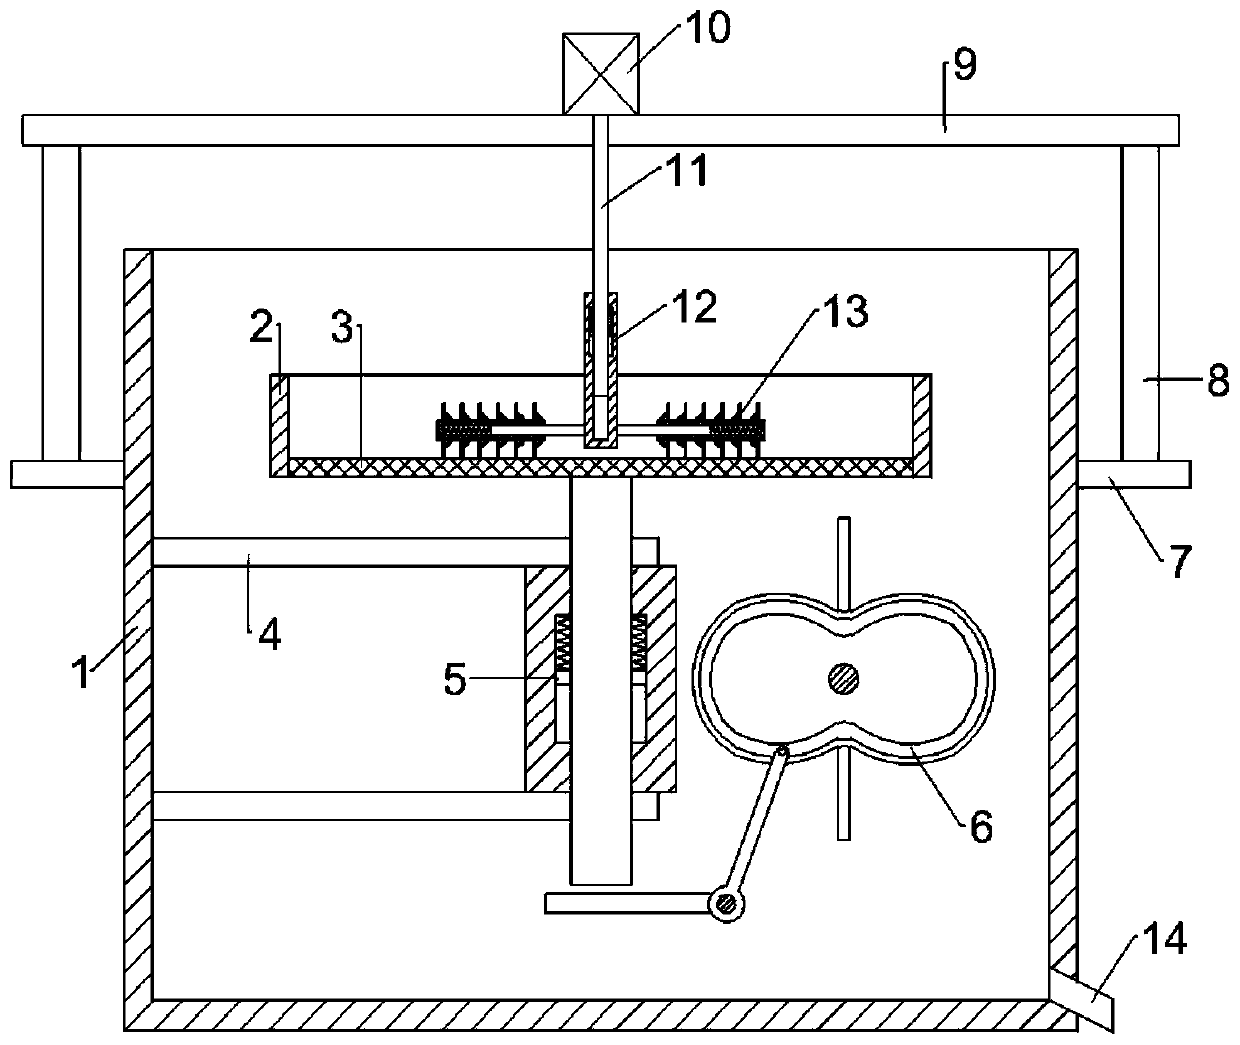 An industrial granular material processing equipment with a screen that can be lifted and rotated